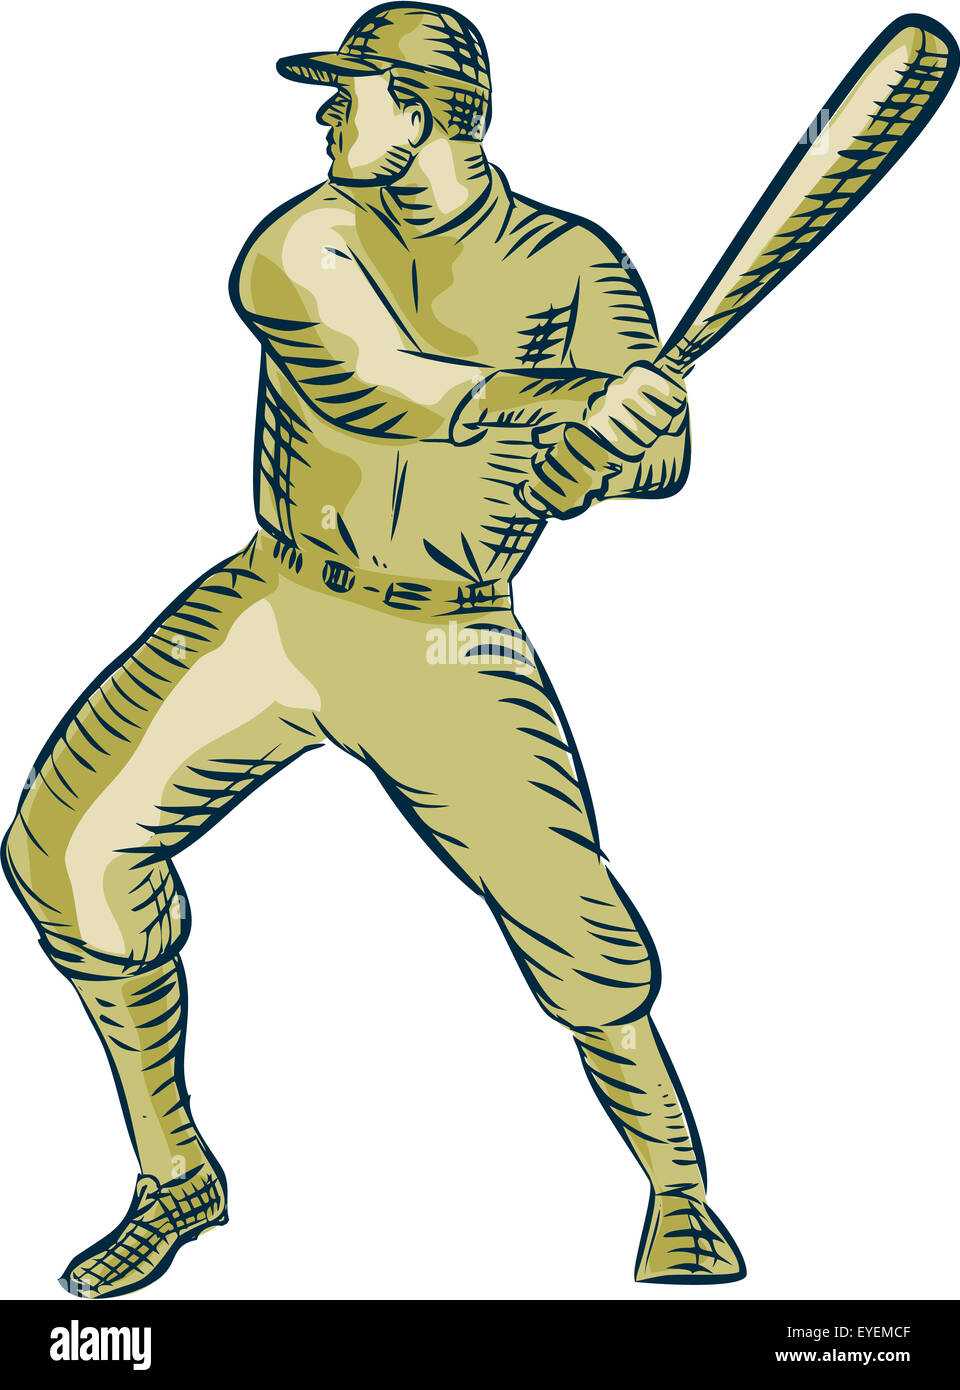 Line Drawings Of Baseball Pitcher And Batter. Stock Photo, Picture and  Royalty Free Image. Image 8808420.